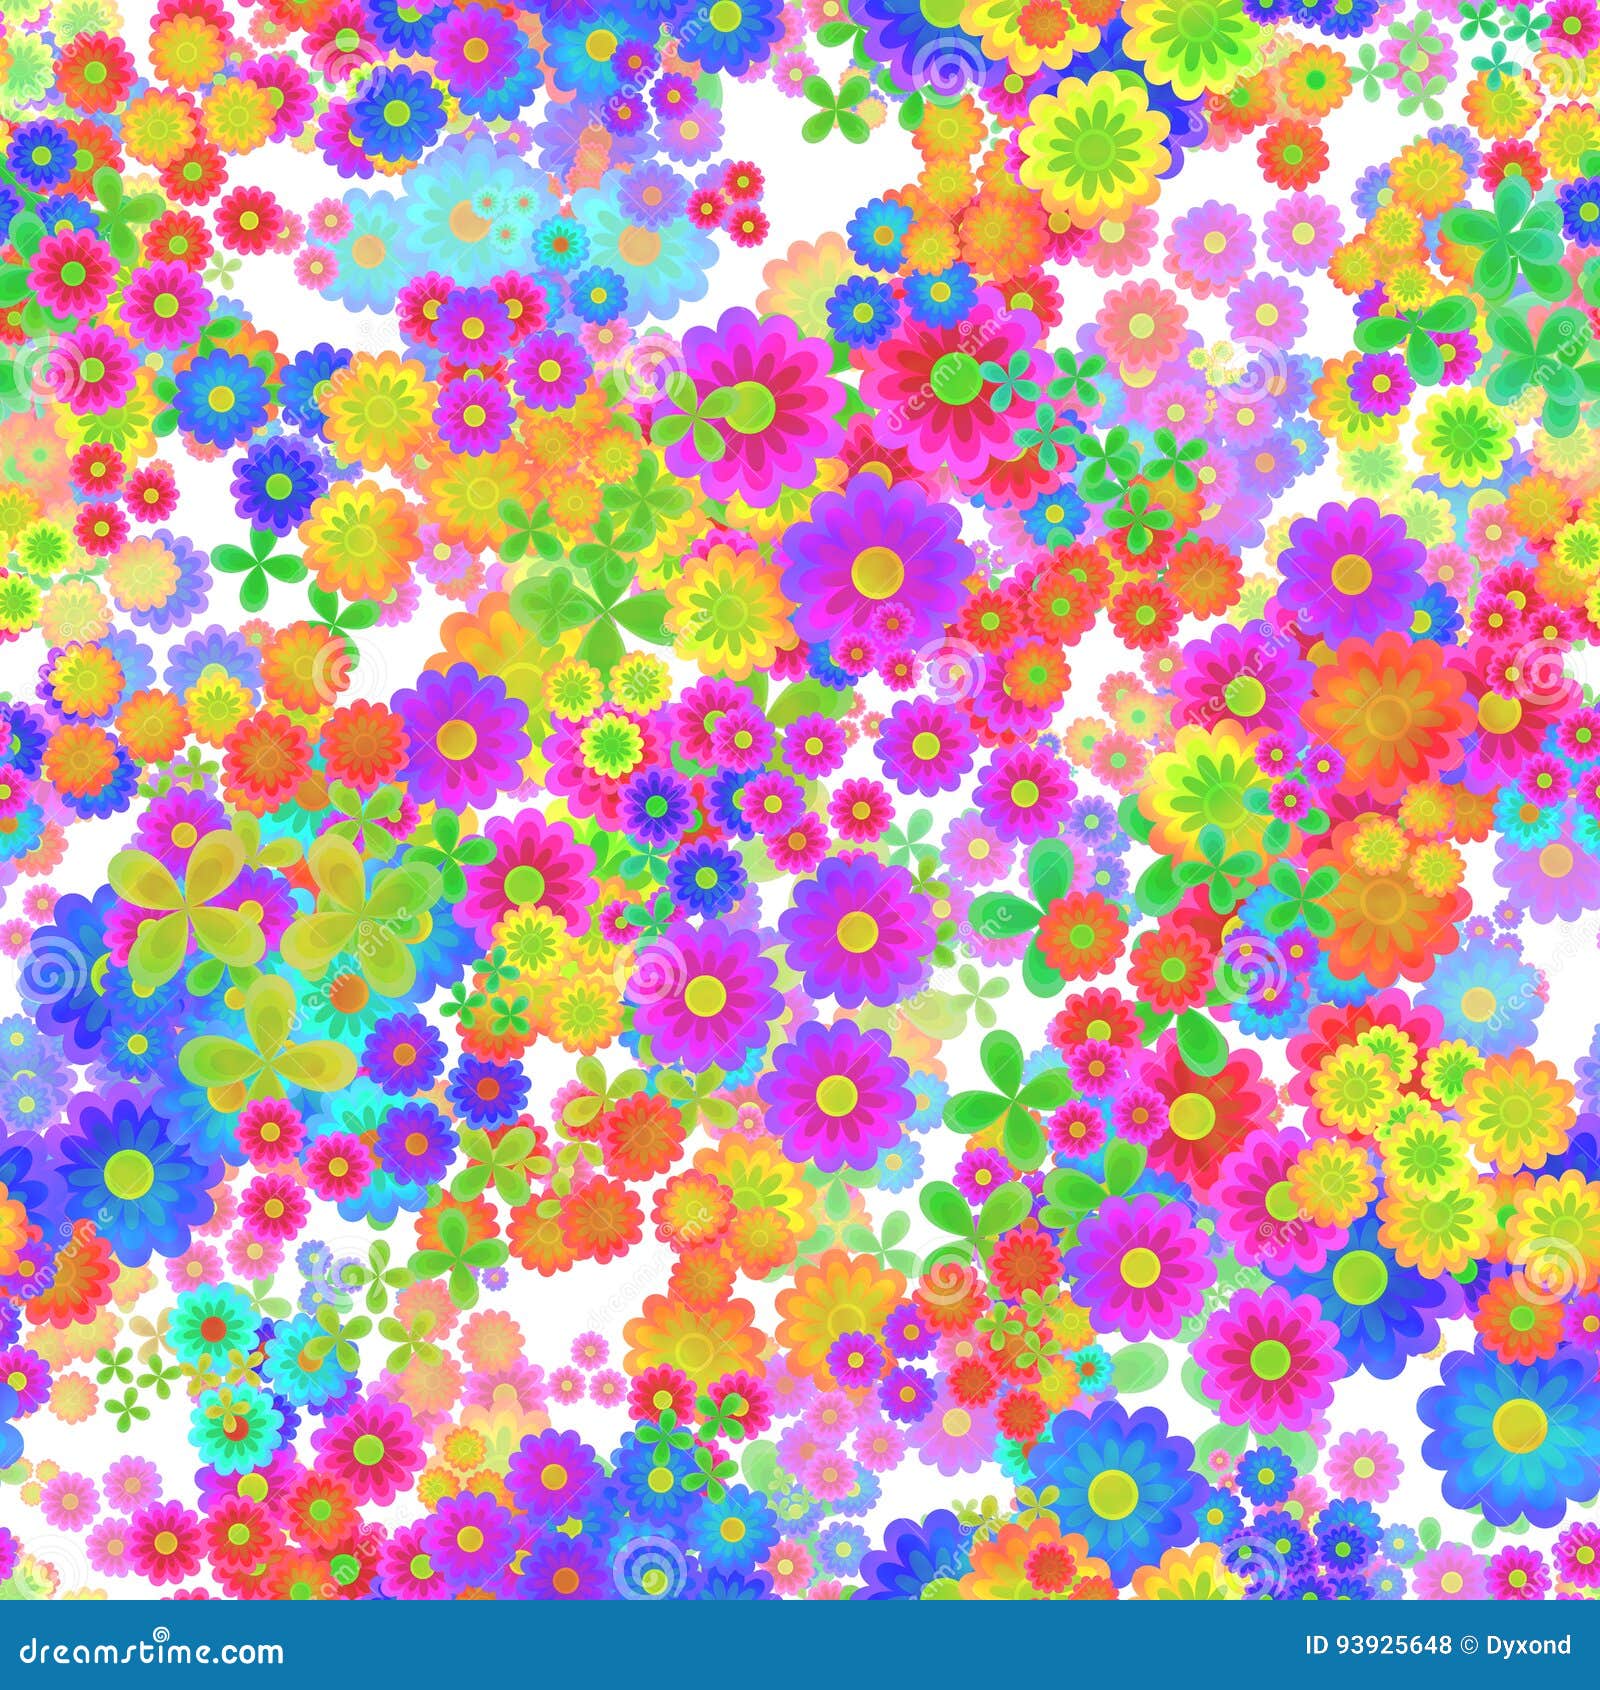 Abstract Colorful Floral Pattern, Multicolor Flowers, Blooms in Rainbow ...